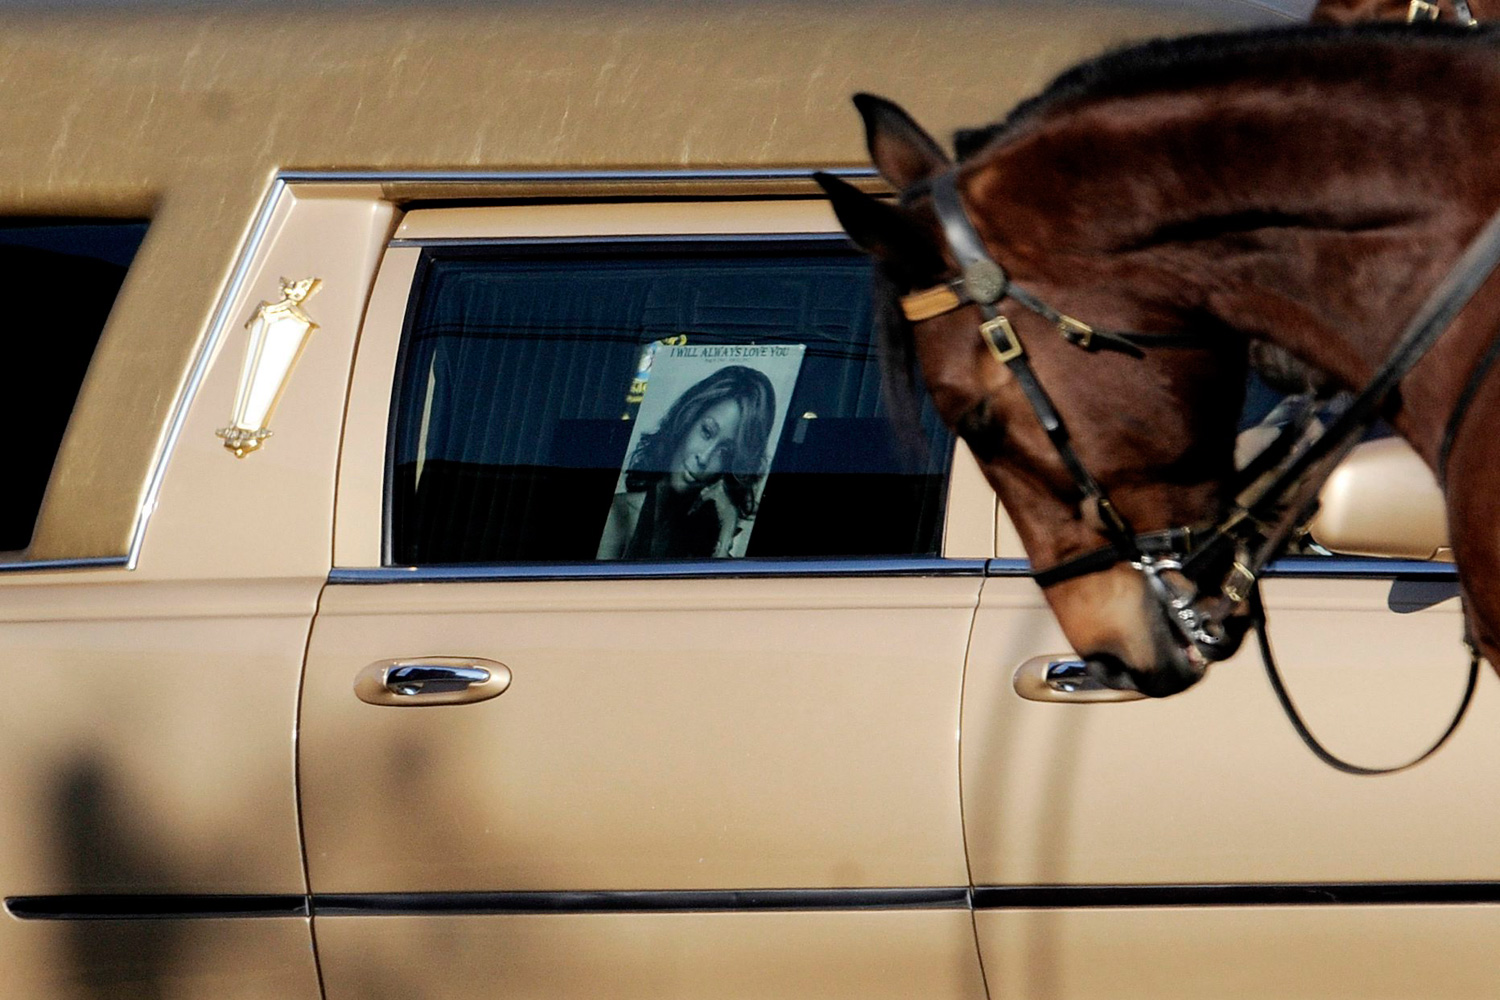 Feb. 18, 2012. A police horse is seen in front of the hearse that carried the casket of singer Whitney Houston, outside of the New Hope Baptist Church before Houston's funeral in Newark, N.J.